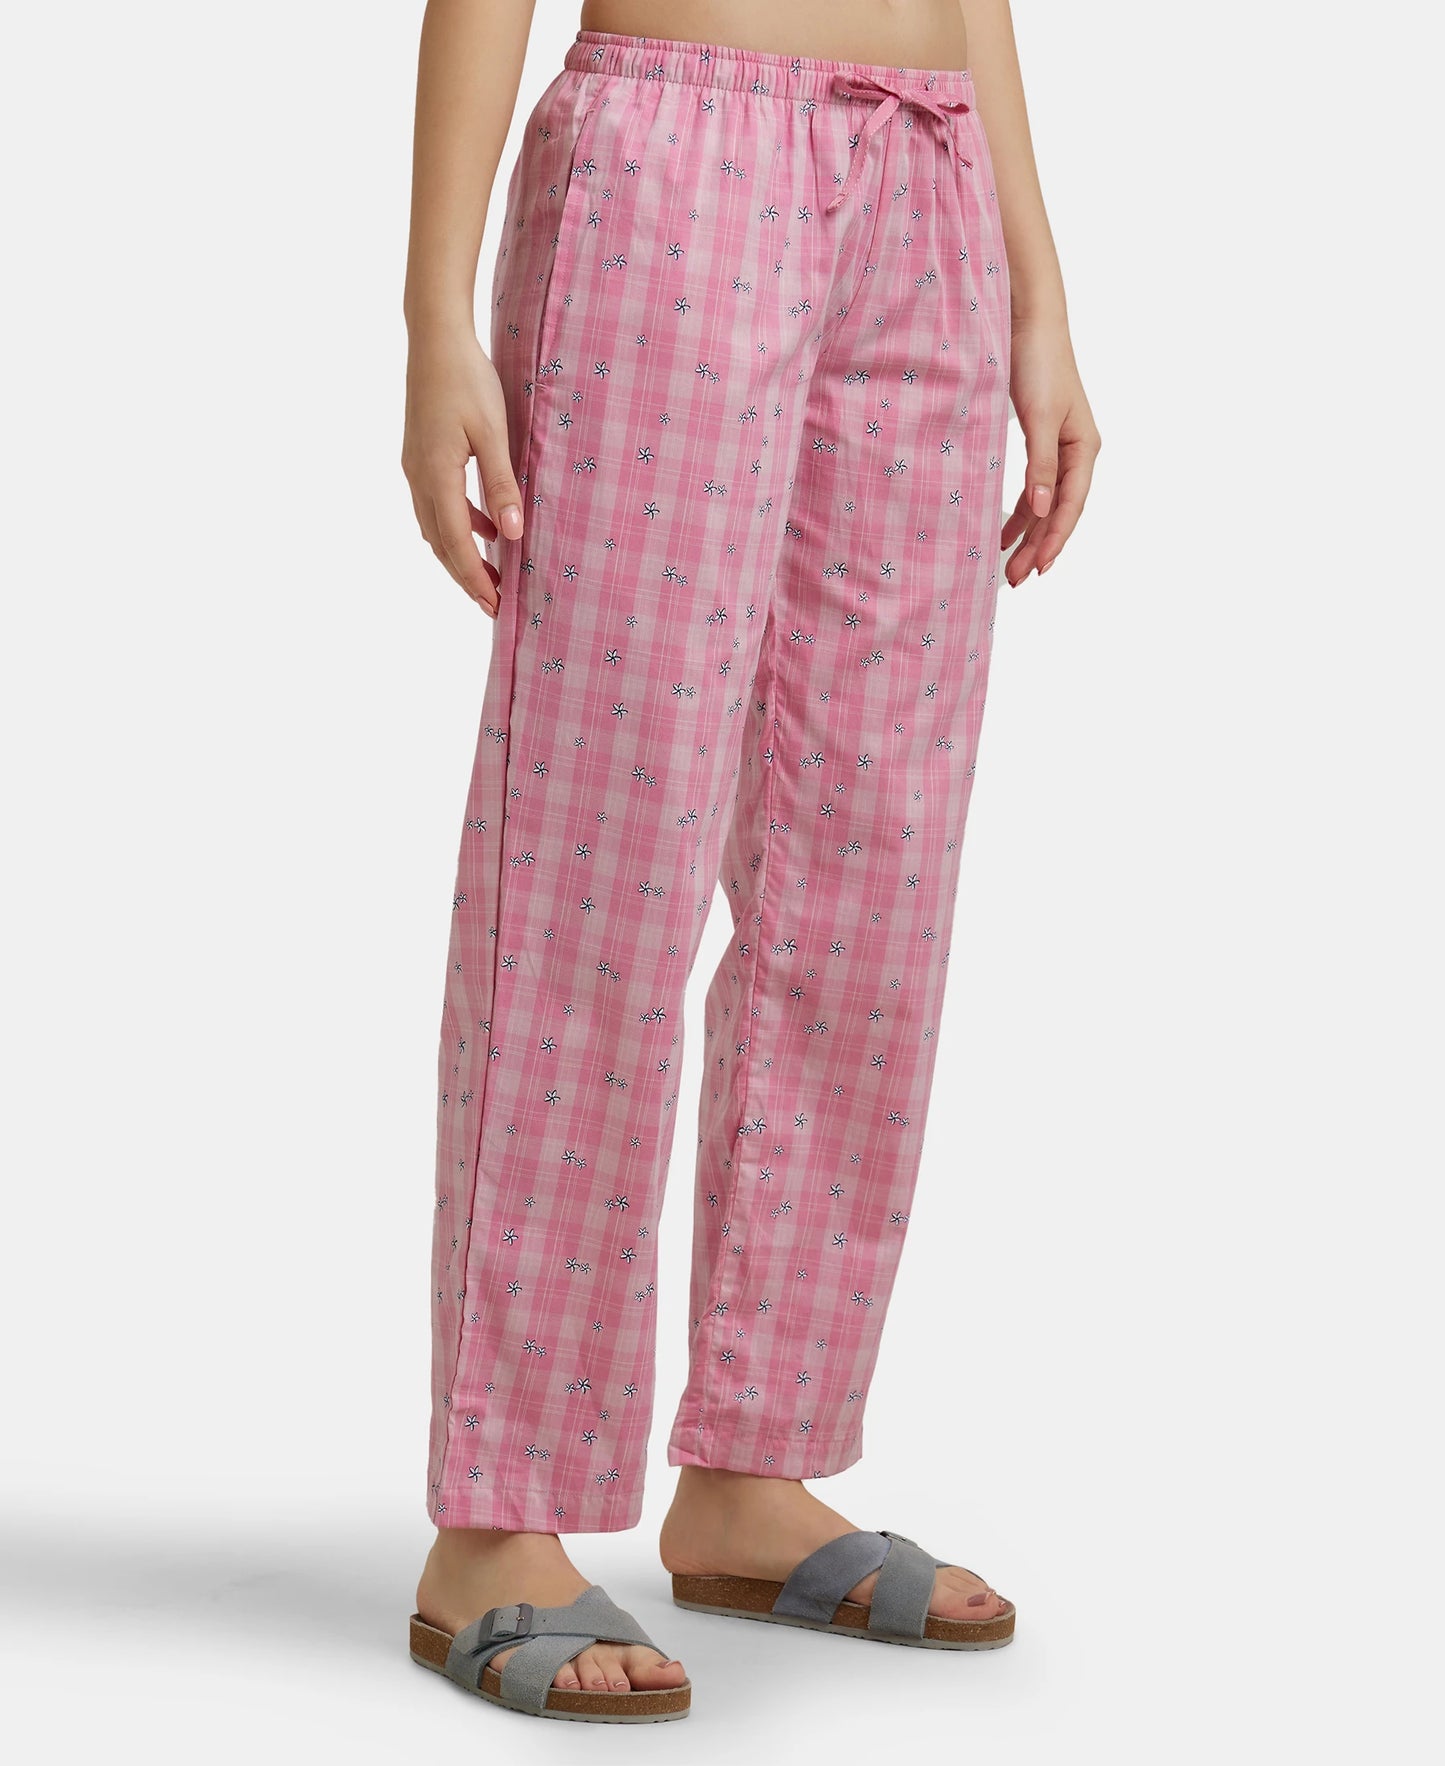 Super Combed Cotton Woven Fabric Relaxed Fit Striped Pyjama with Side Pockets - Wild Rose